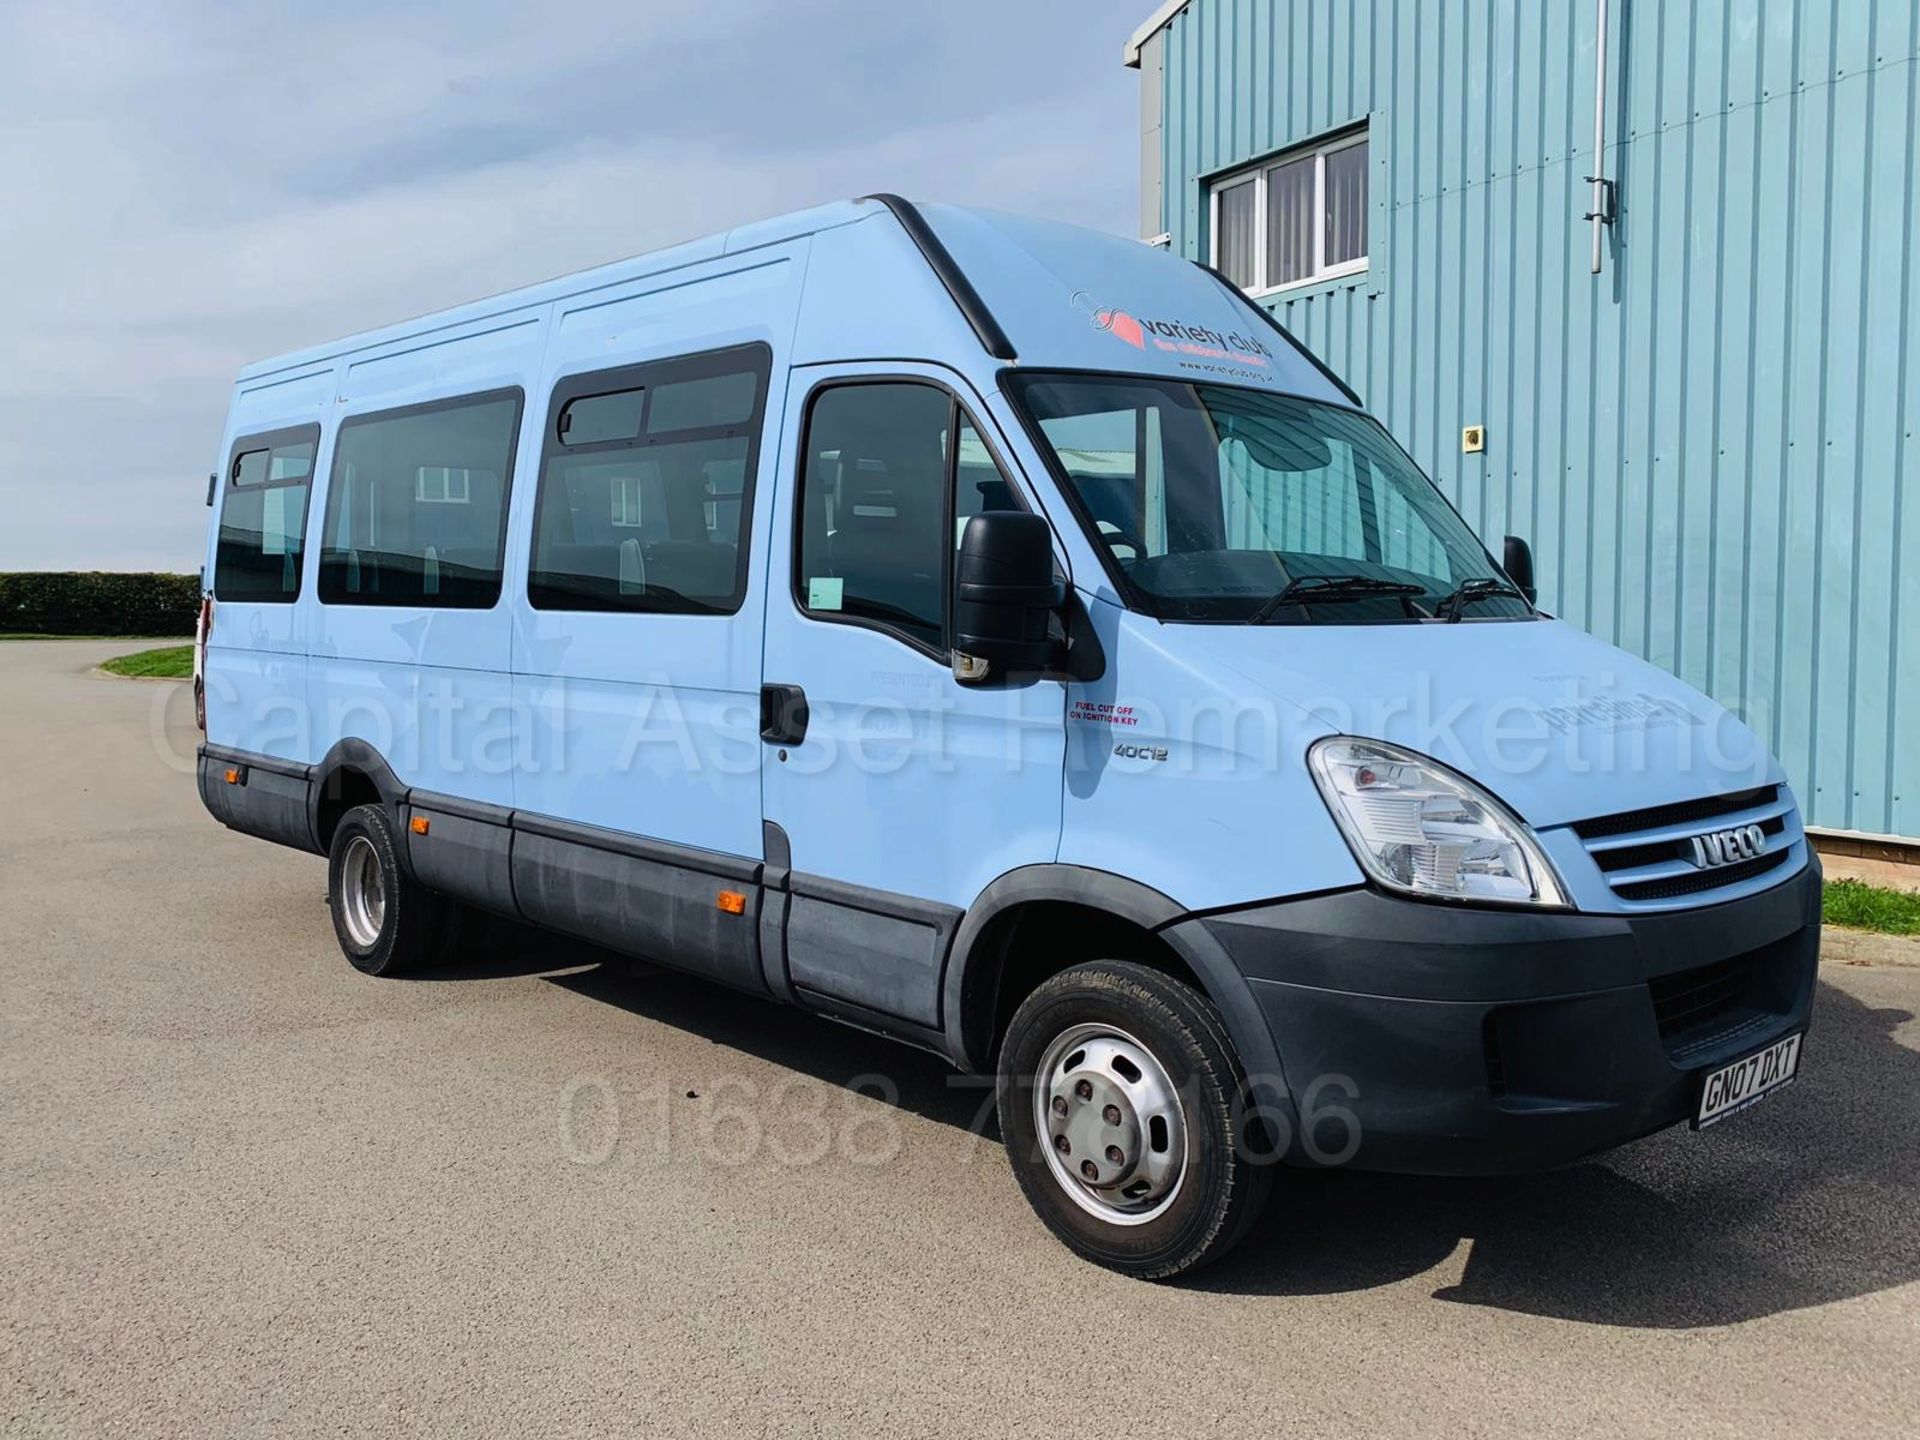 IVECO DAILY 40C12 *LWB - 16 SEATER MINI-BUS / COACH* (2007) *QUICK RELEASE SEATS* (ONLY 11K MILES)